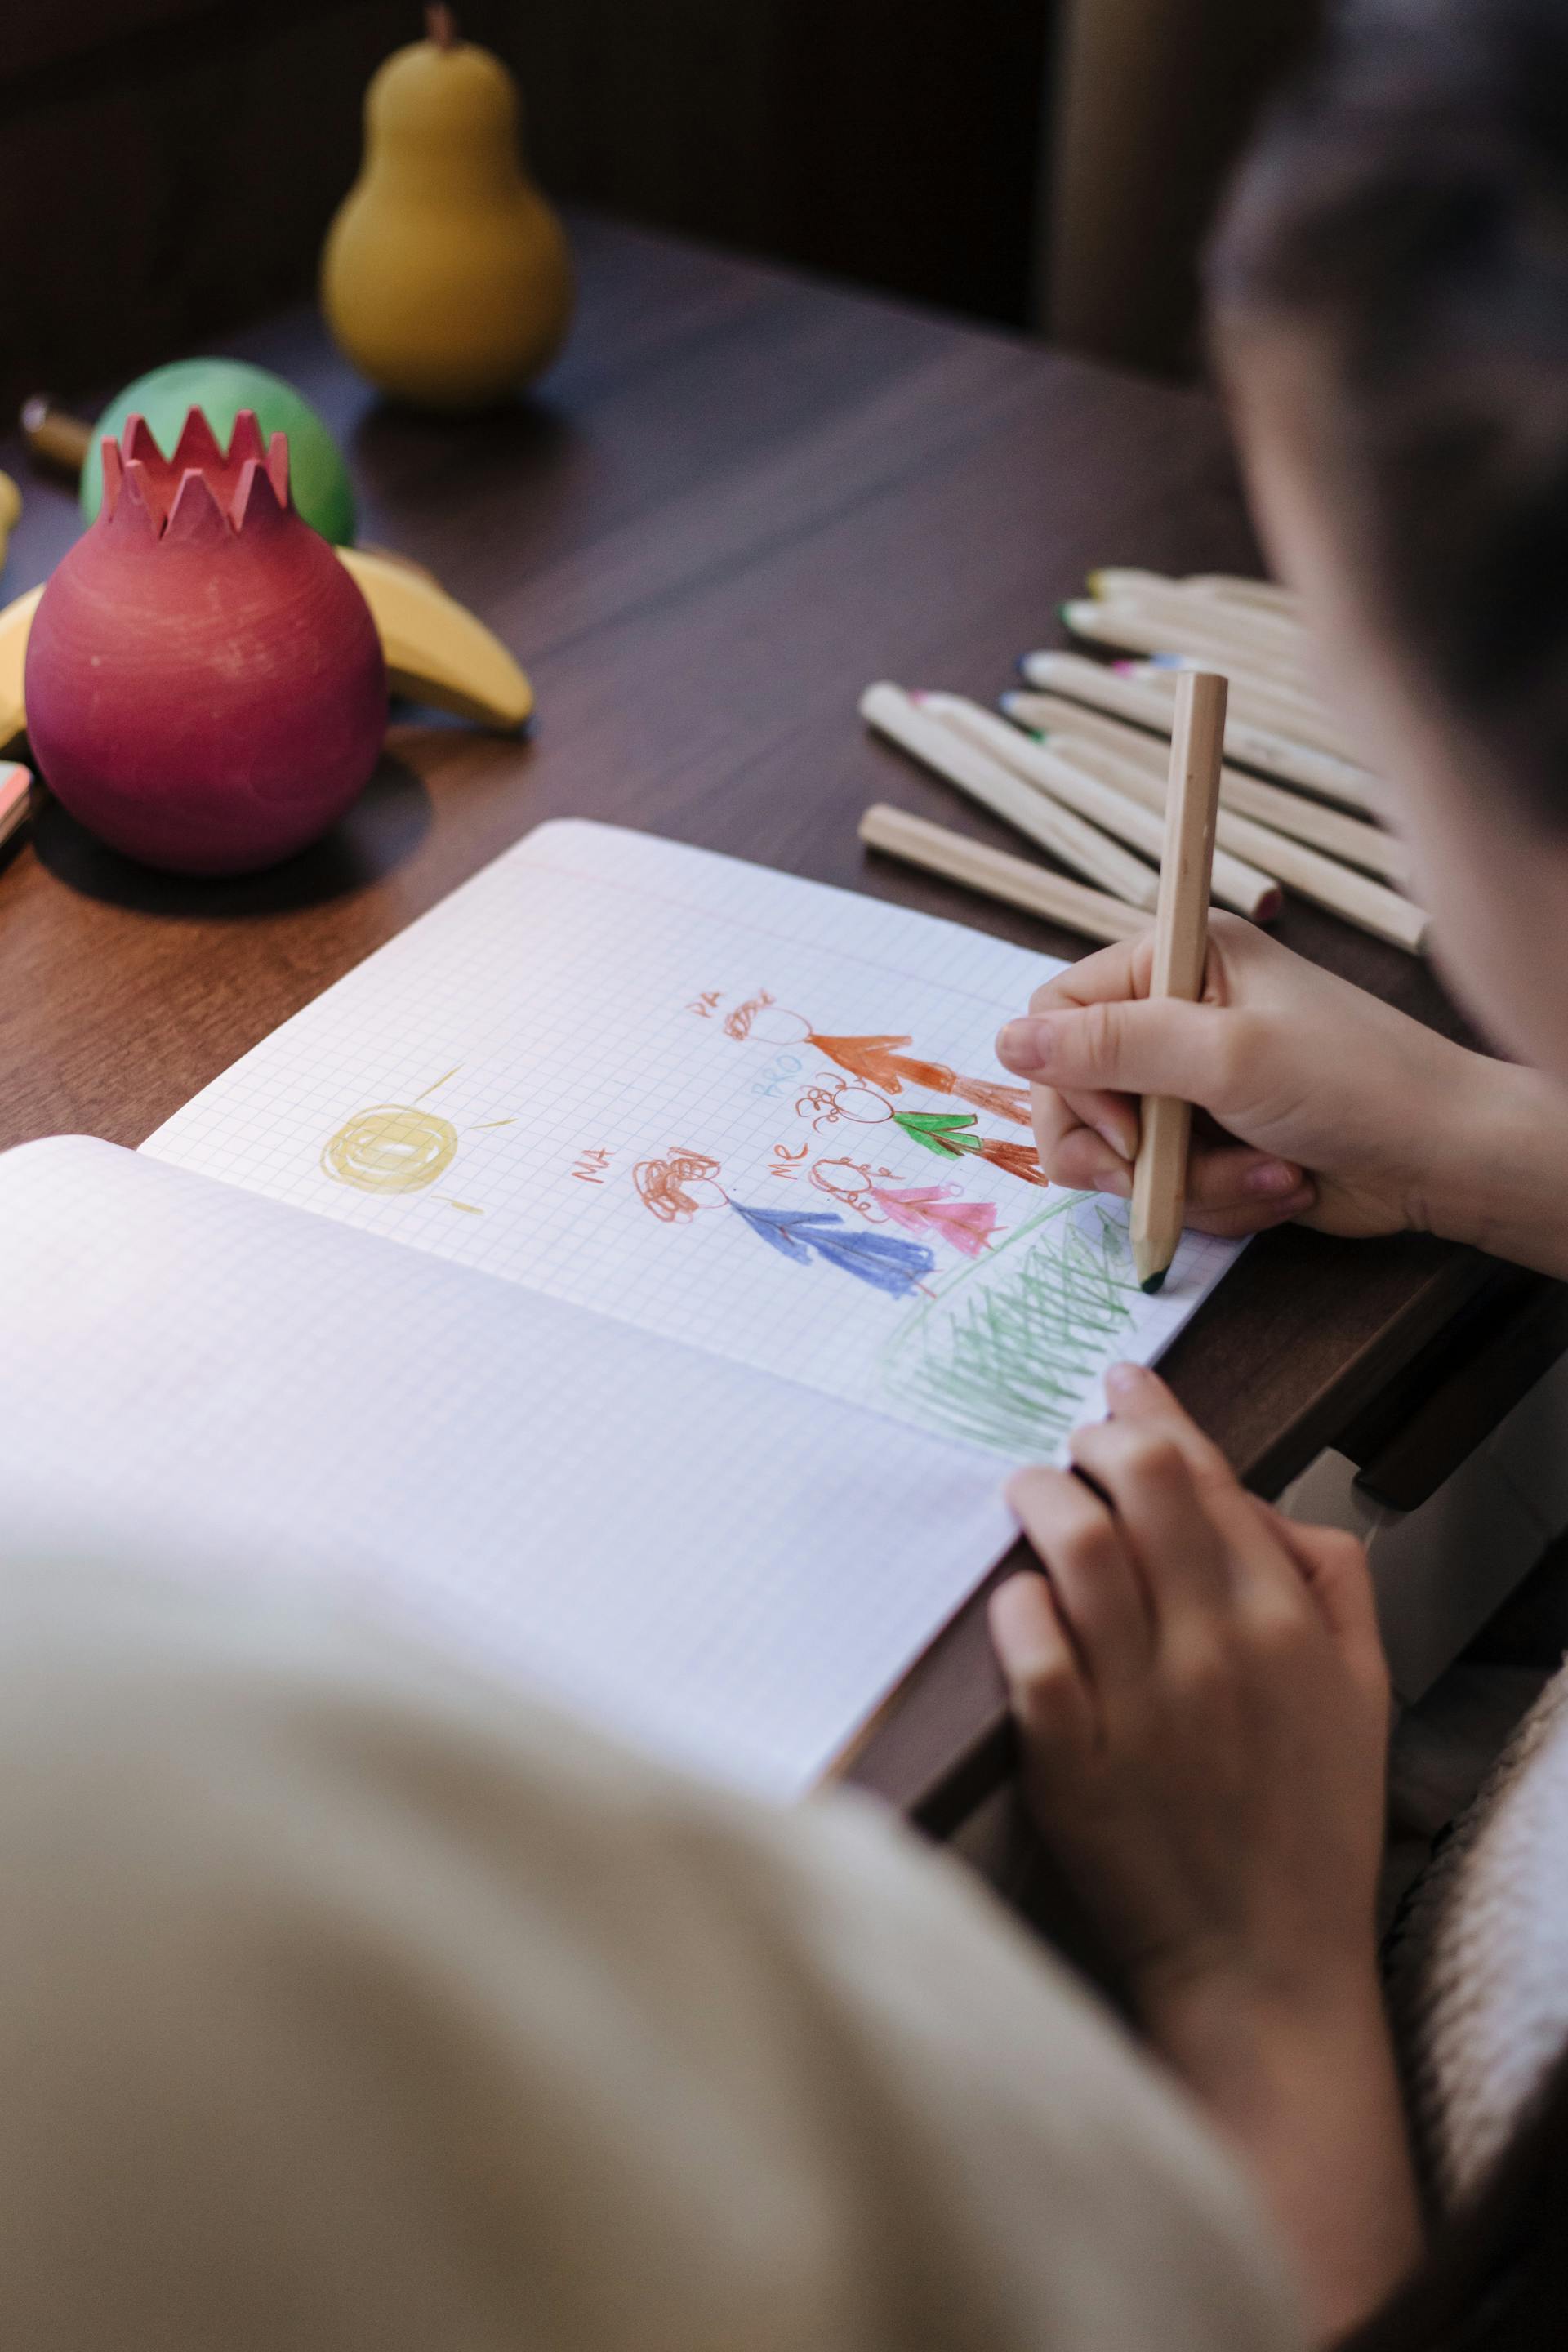 A child's drawing of my family | Source: Pexels